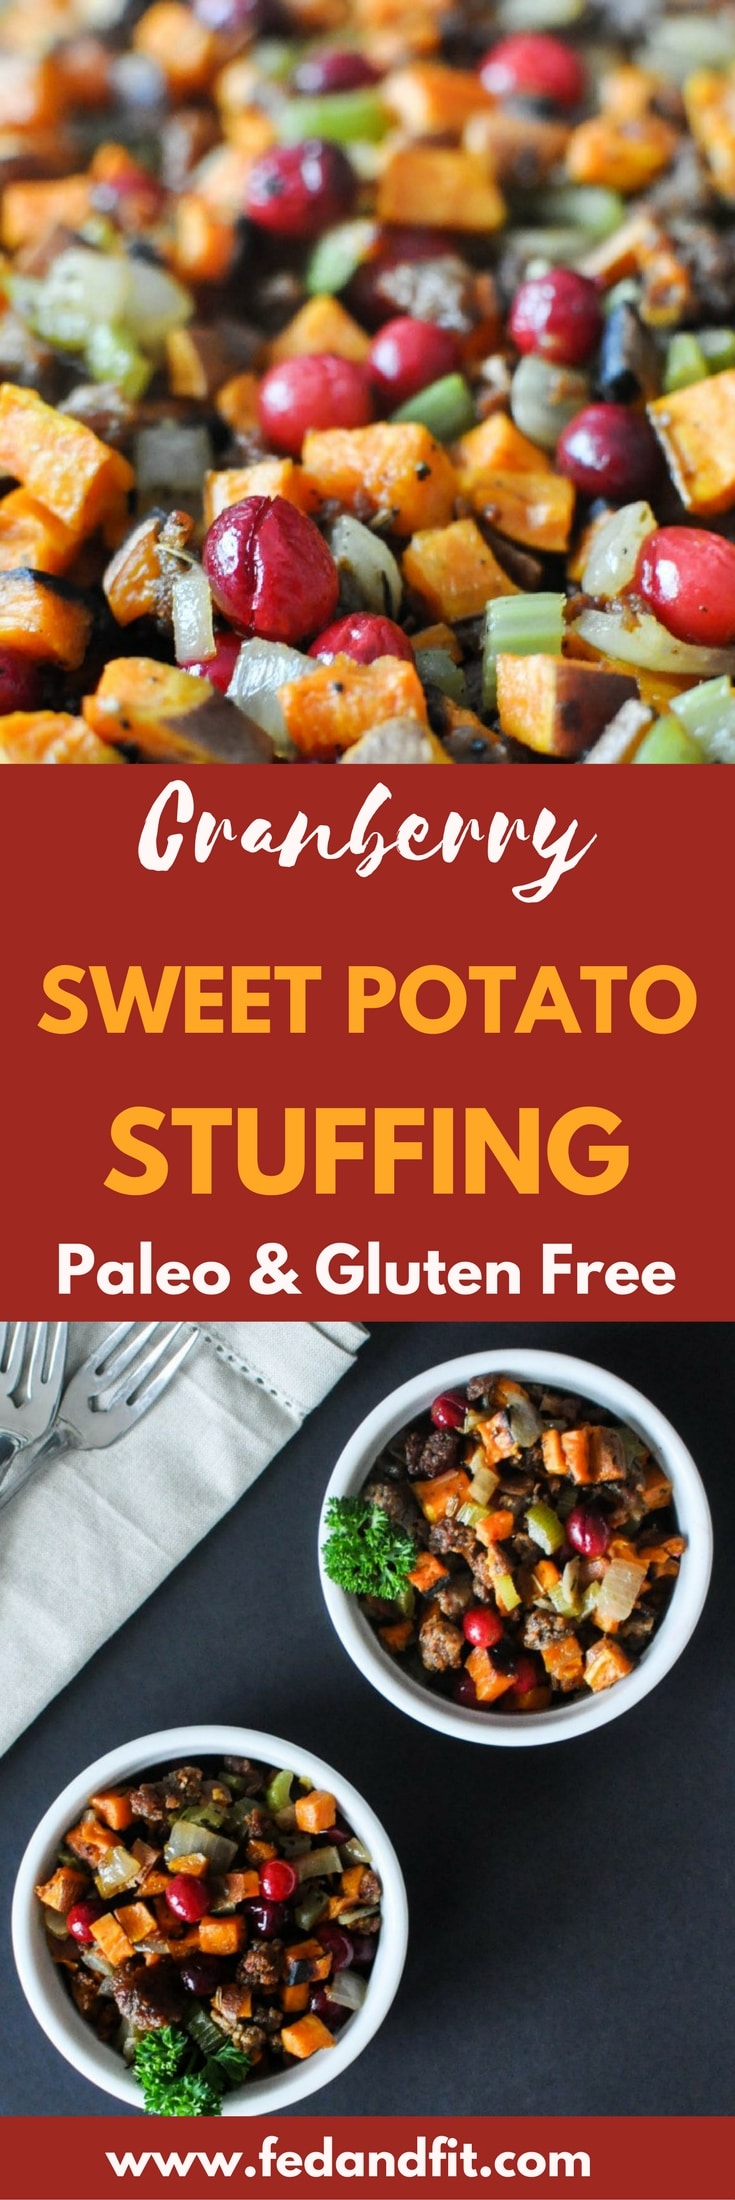 This cranberry sweet potato stuffing is the perfect Paleo addition to your table this Thanksgiving! 